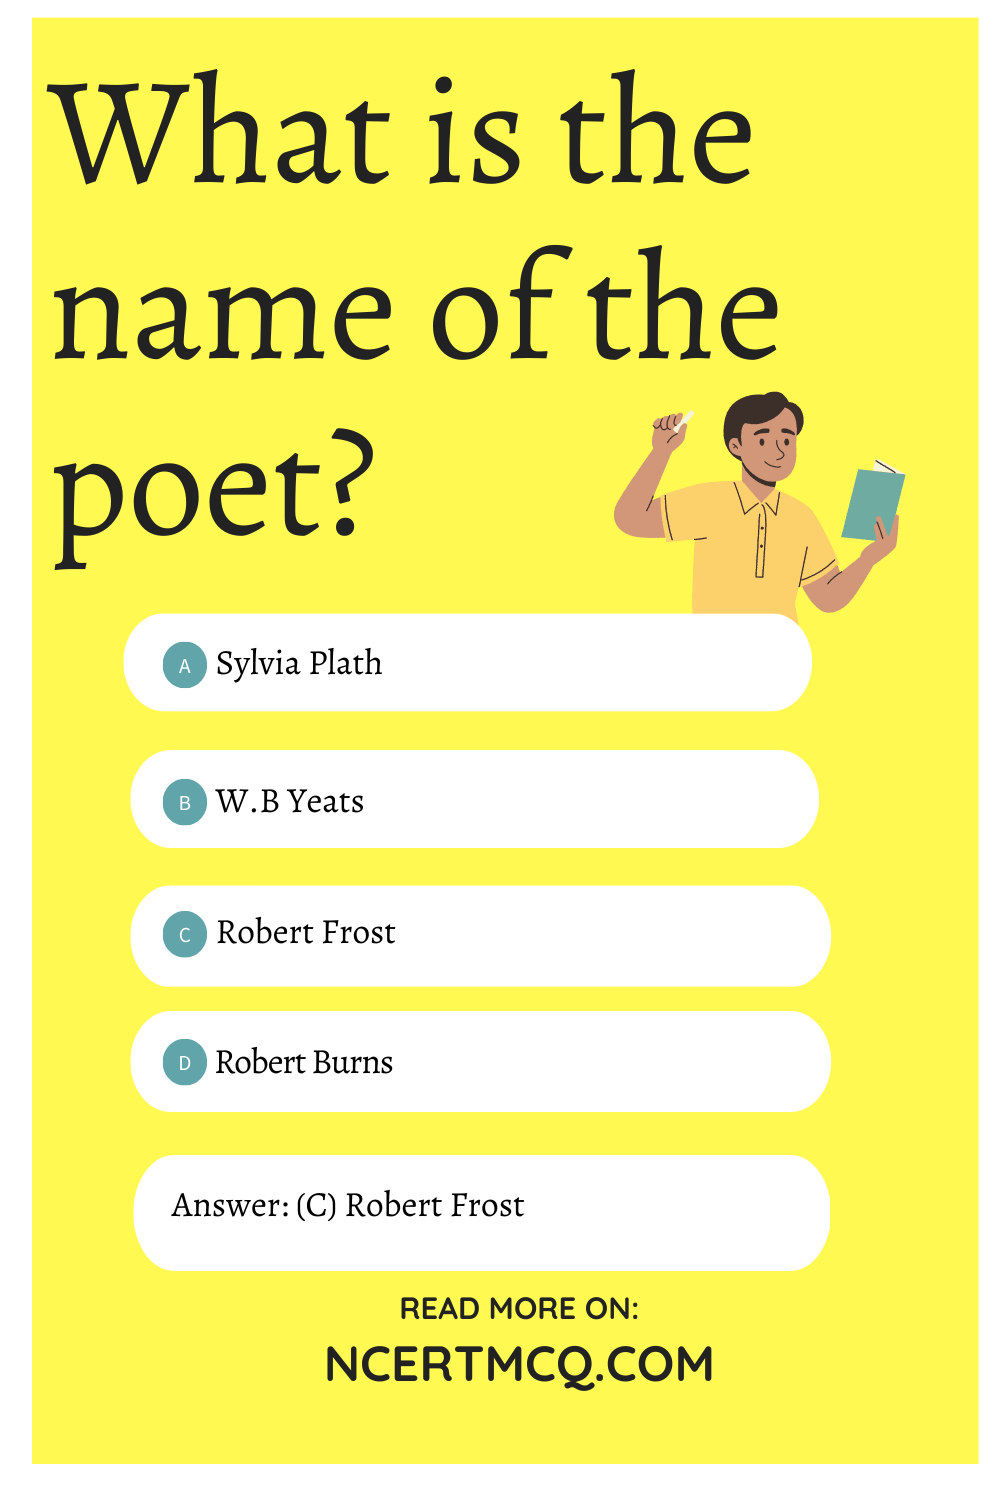 What is the name of the poet?